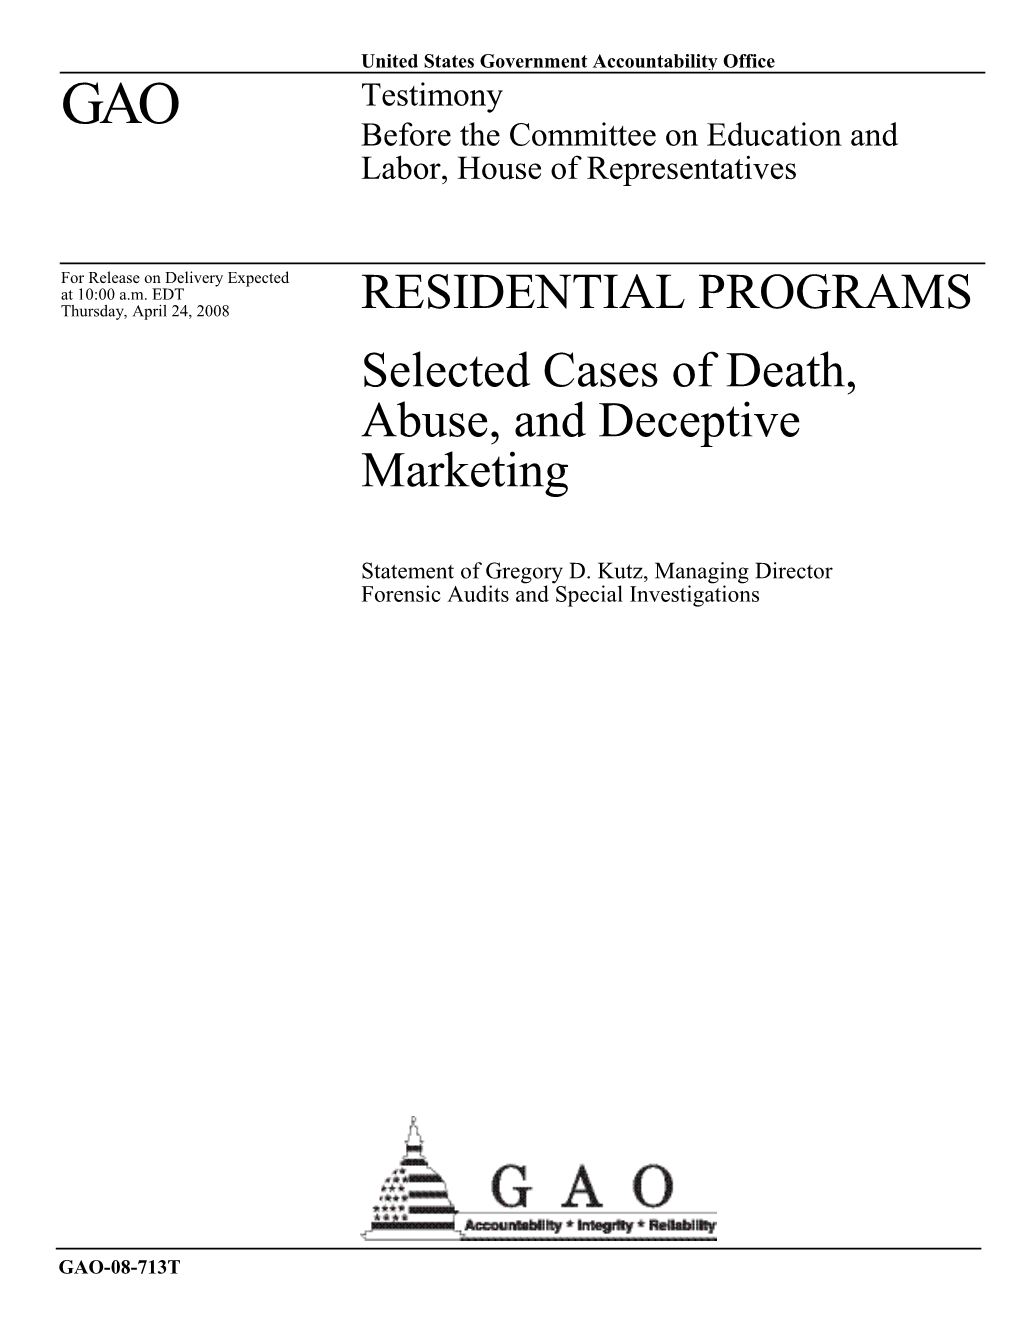 GAO-08-713T, RESIDENTIAL PROGRAMS: Selected Cases of Death, Abuse, and Deceptive Marketing